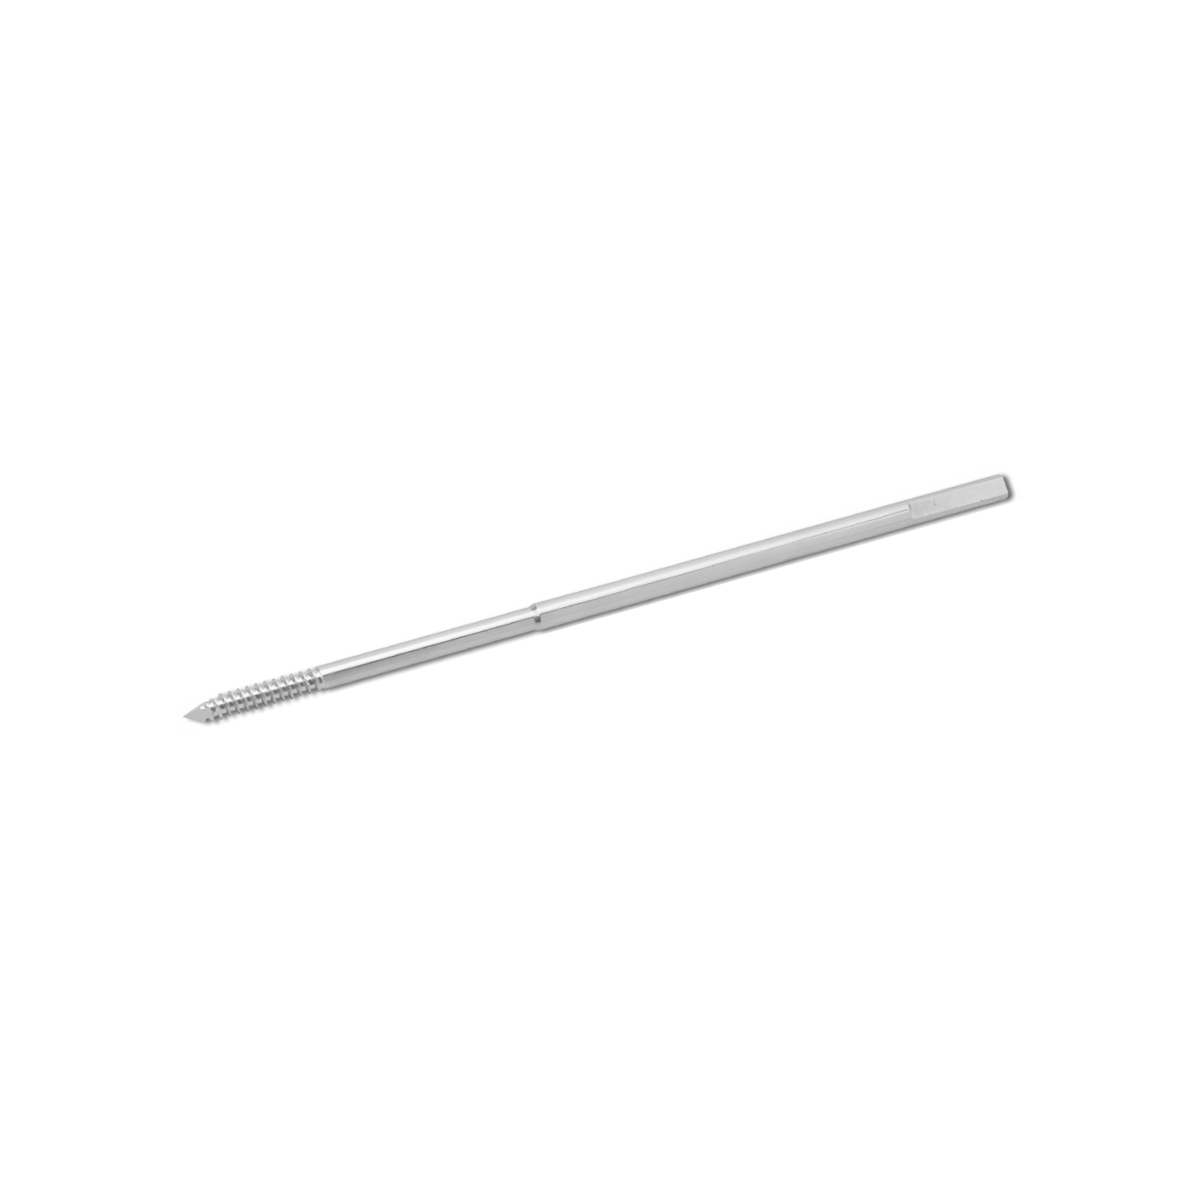 Front Threaded Pin 3.5mm X 4.0mm Shaft